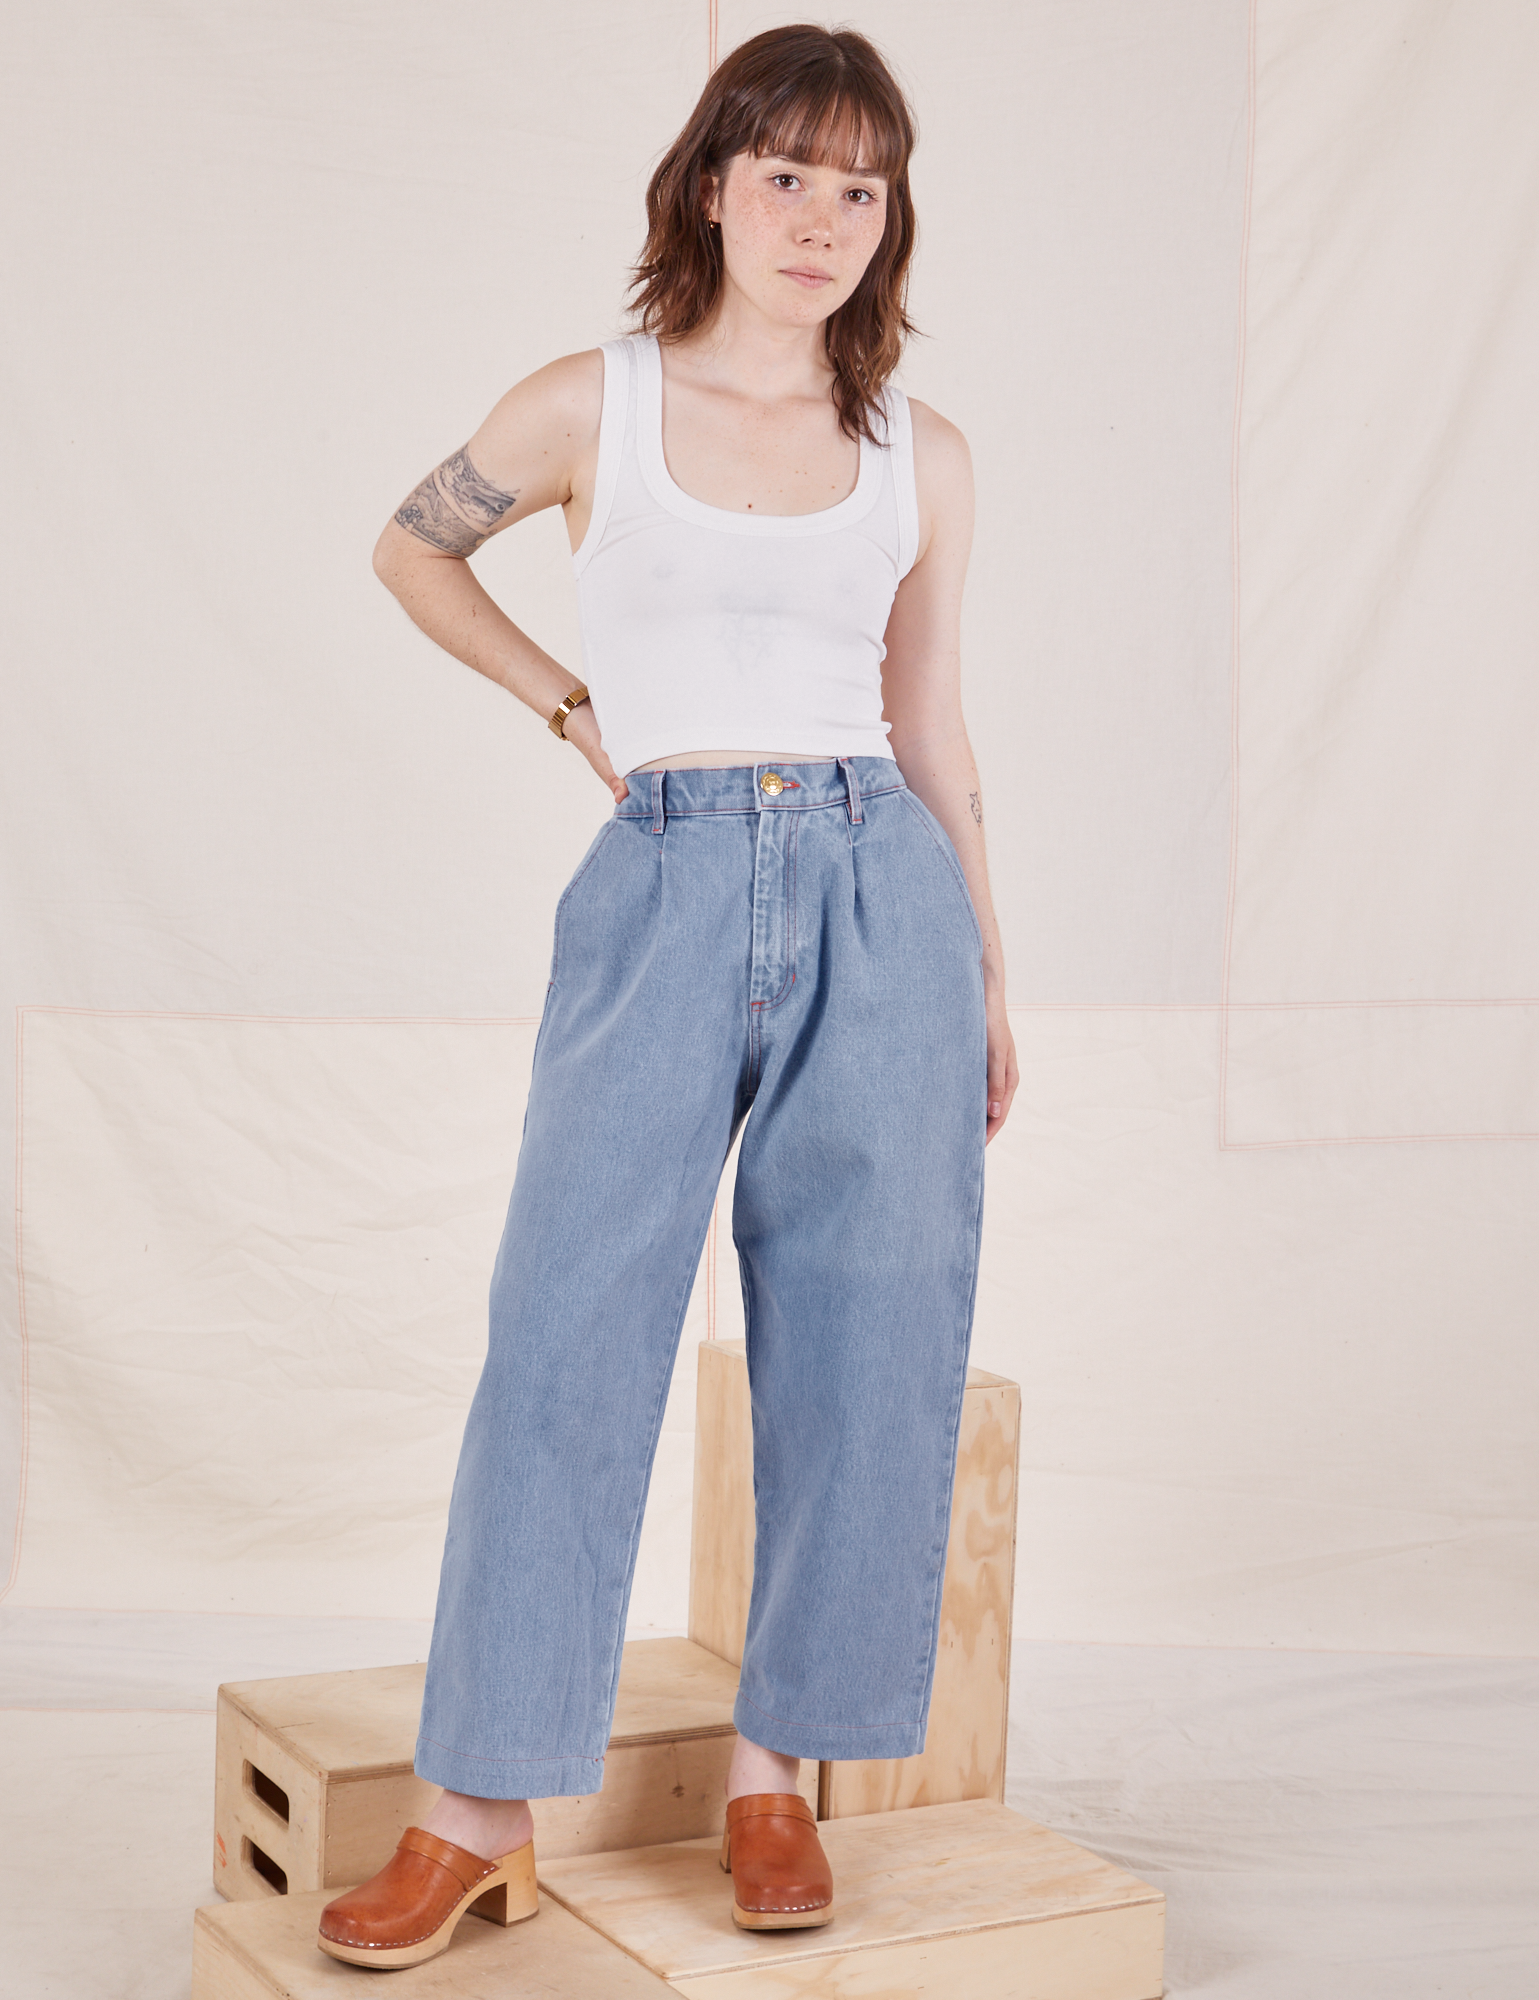 Hana is 5&#39;3&quot; and wearing XXS Petite Denim Trouser Jeans in Light Wash paired with Cropped Tank Top in vintage tee off-white t